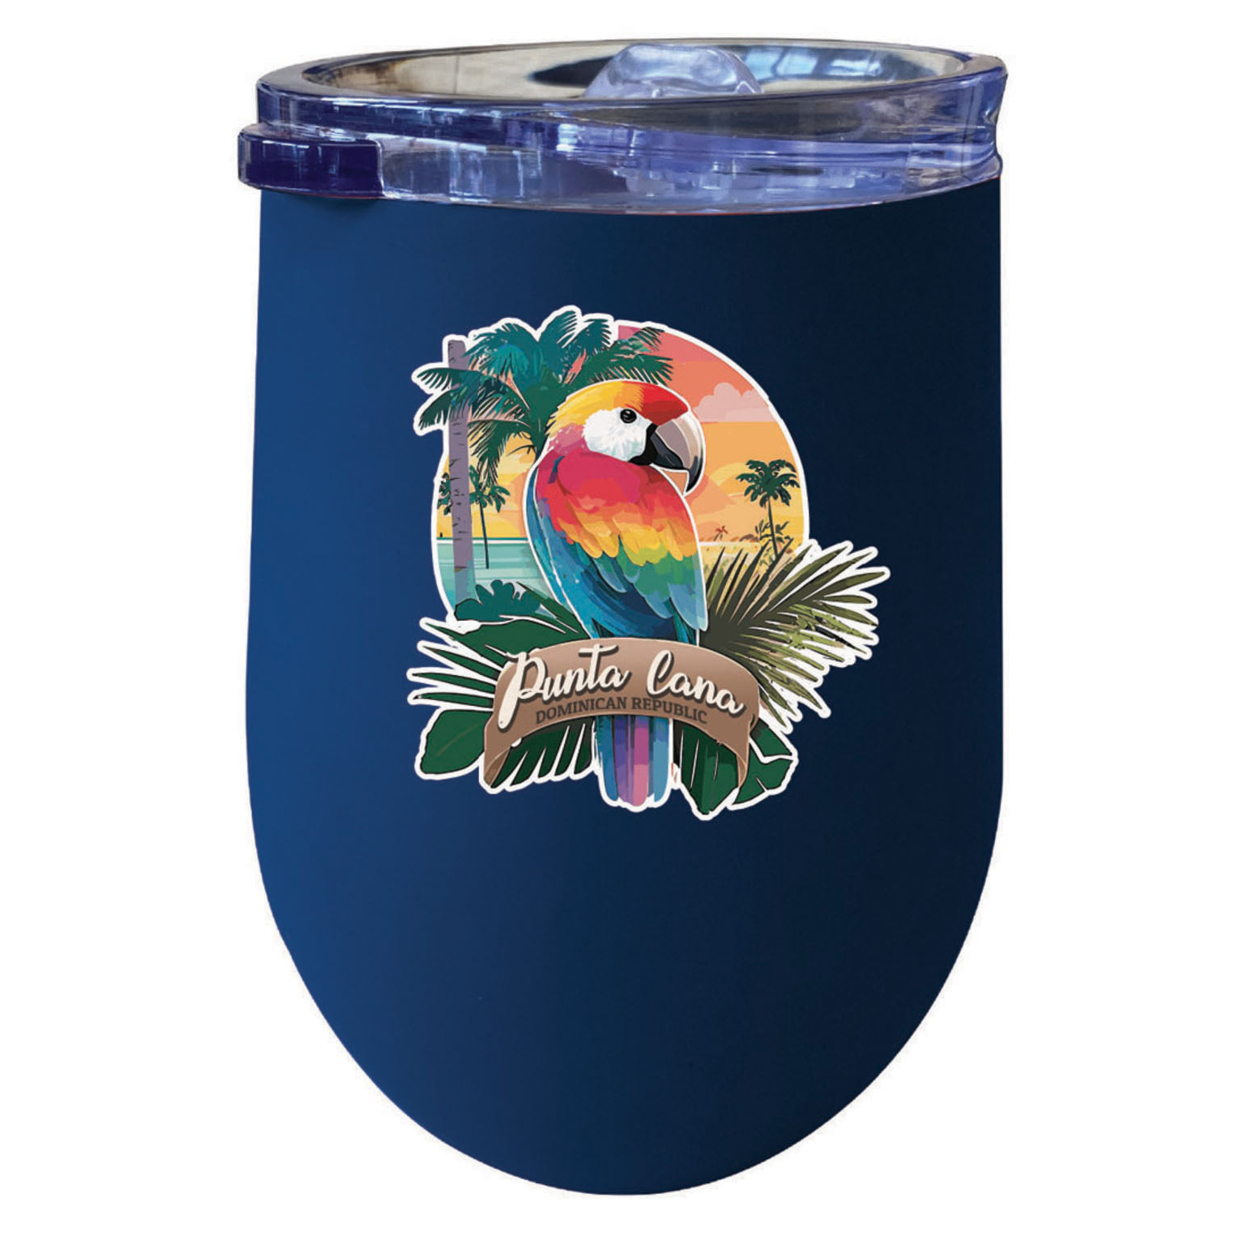 Punta Cana Dominican Republic Souvenir 12 Oz Insulated Wine Stainless Steel Tumbler - Navy, PARROT